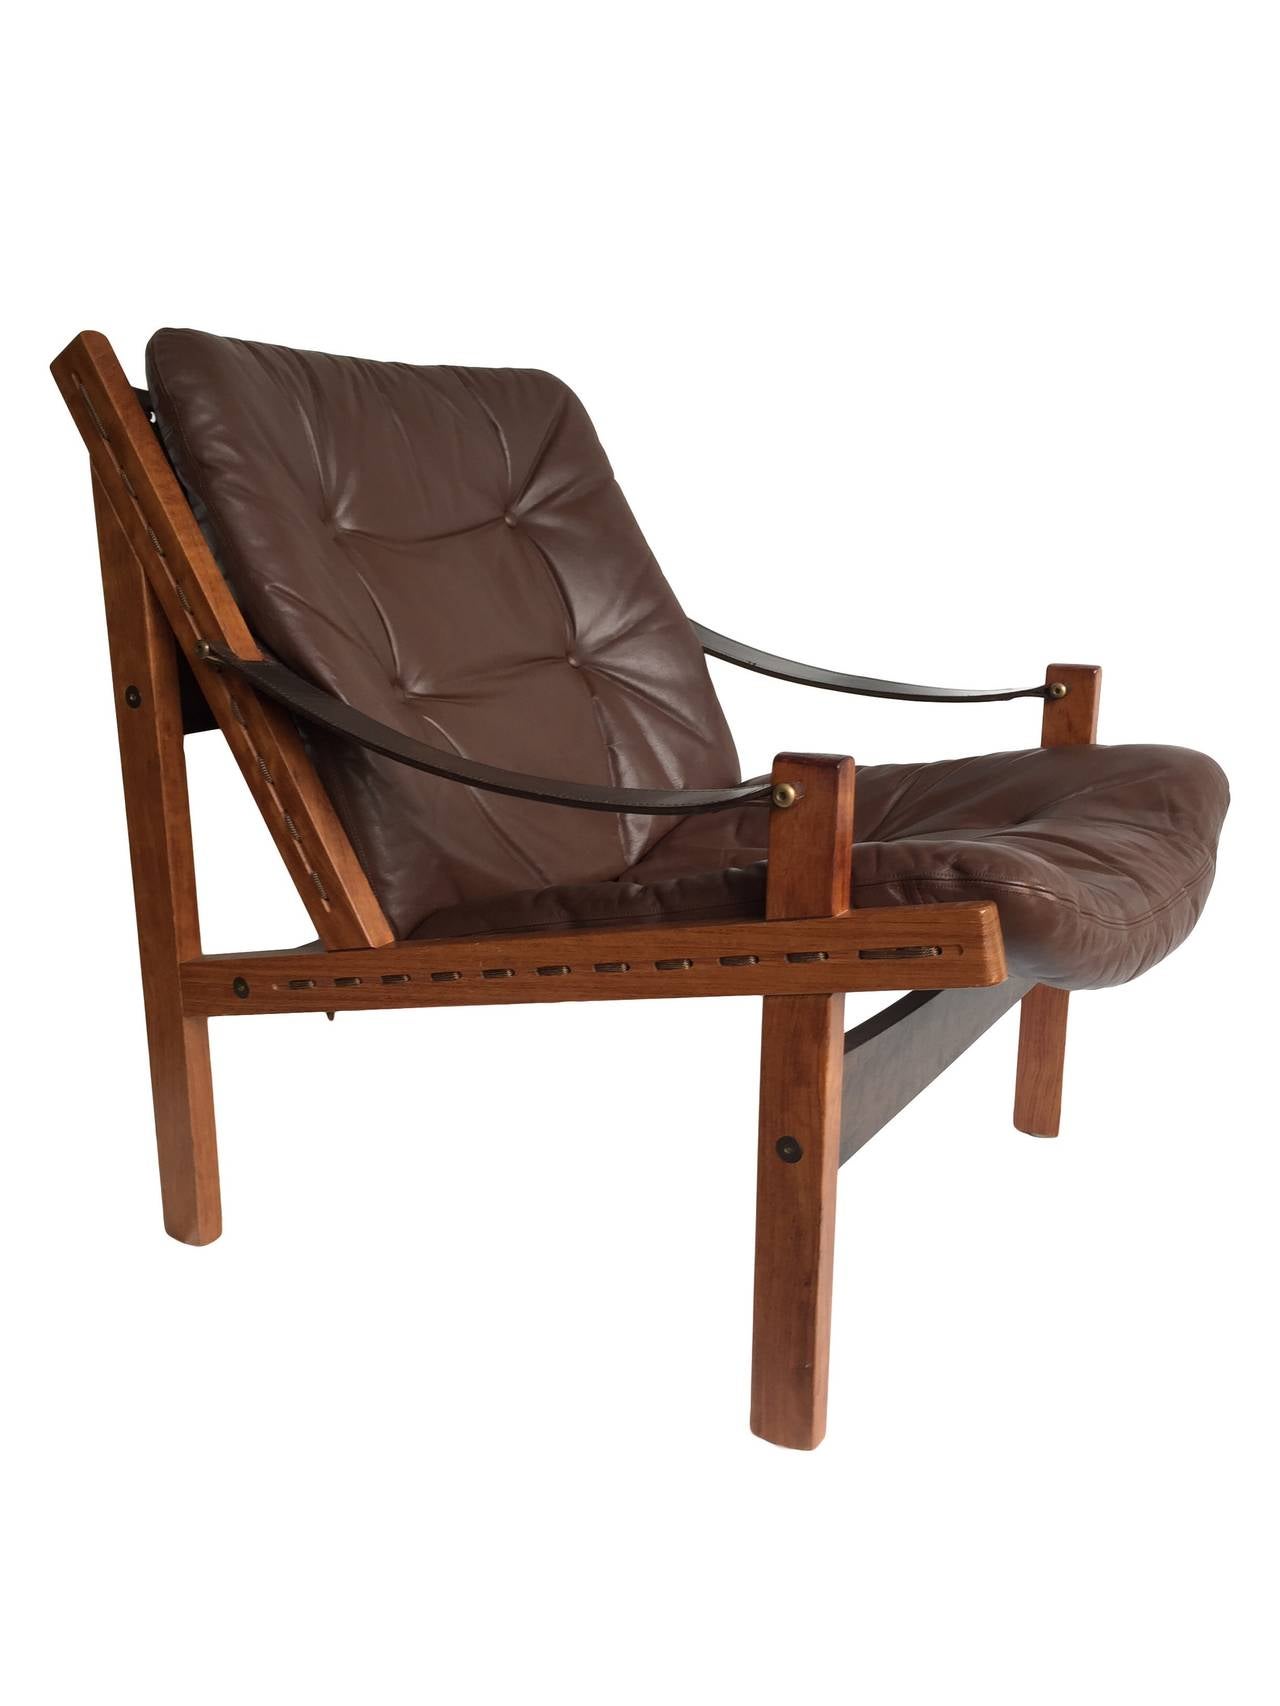 Torbjørn Afdal hunter chairs in leather and rosewood.
Produced by Vatne, Norway, 1960s.